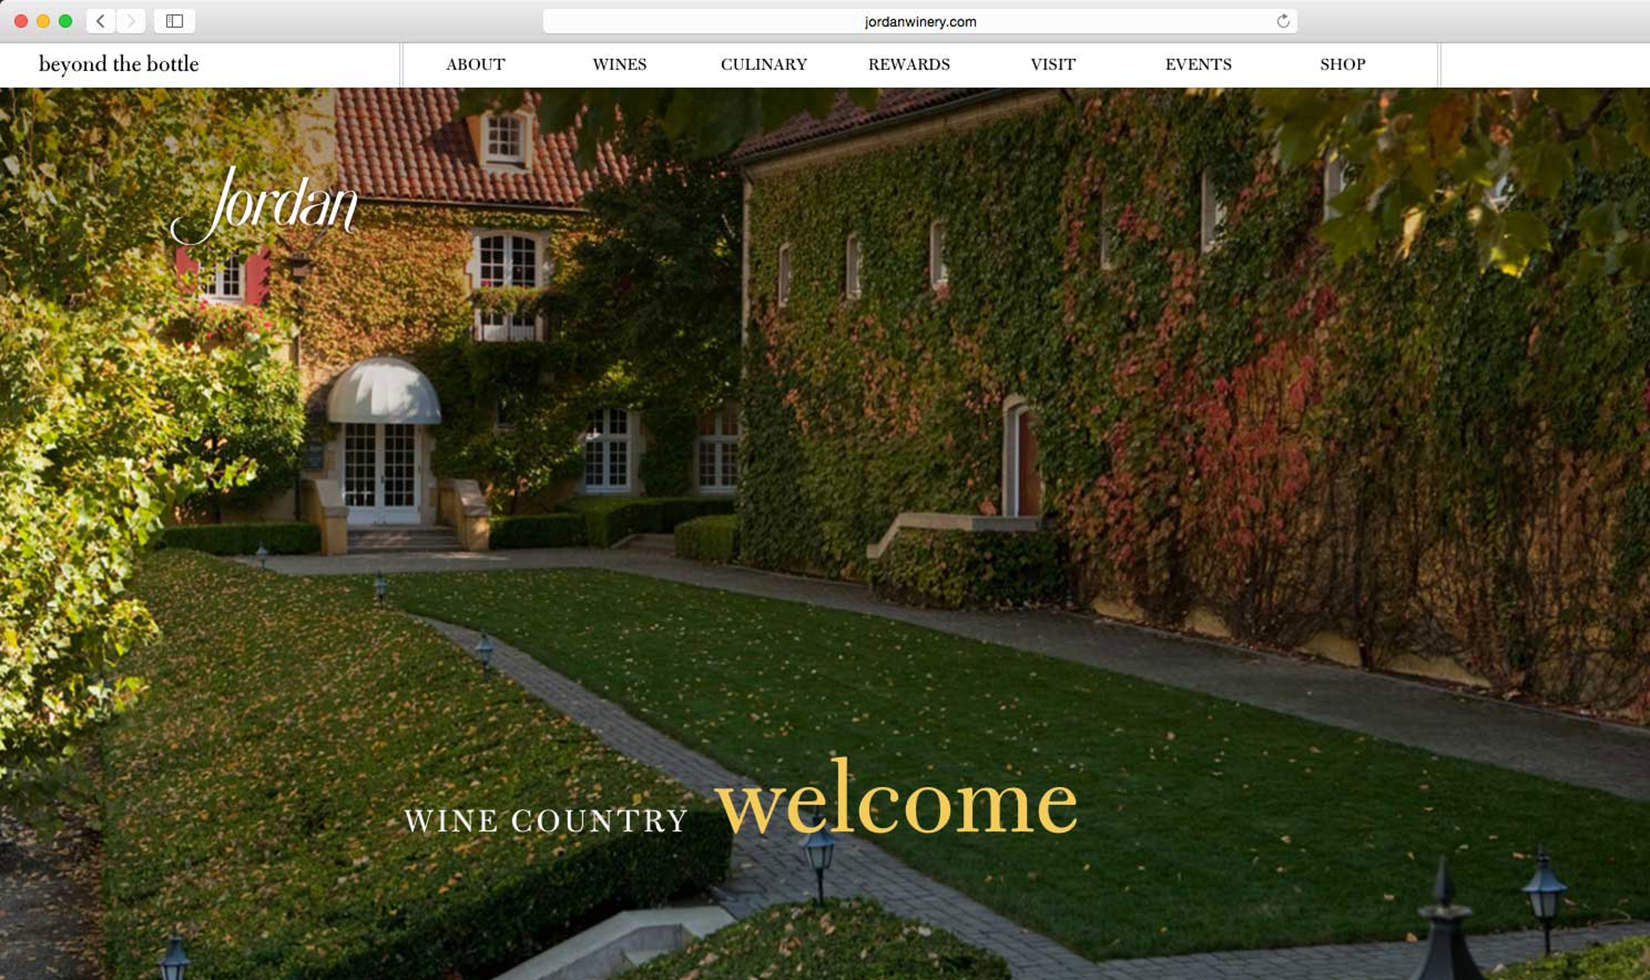 Entrance to Jordan Winery Chateau with fall colors with image text: "wine country welcome. Jordan"